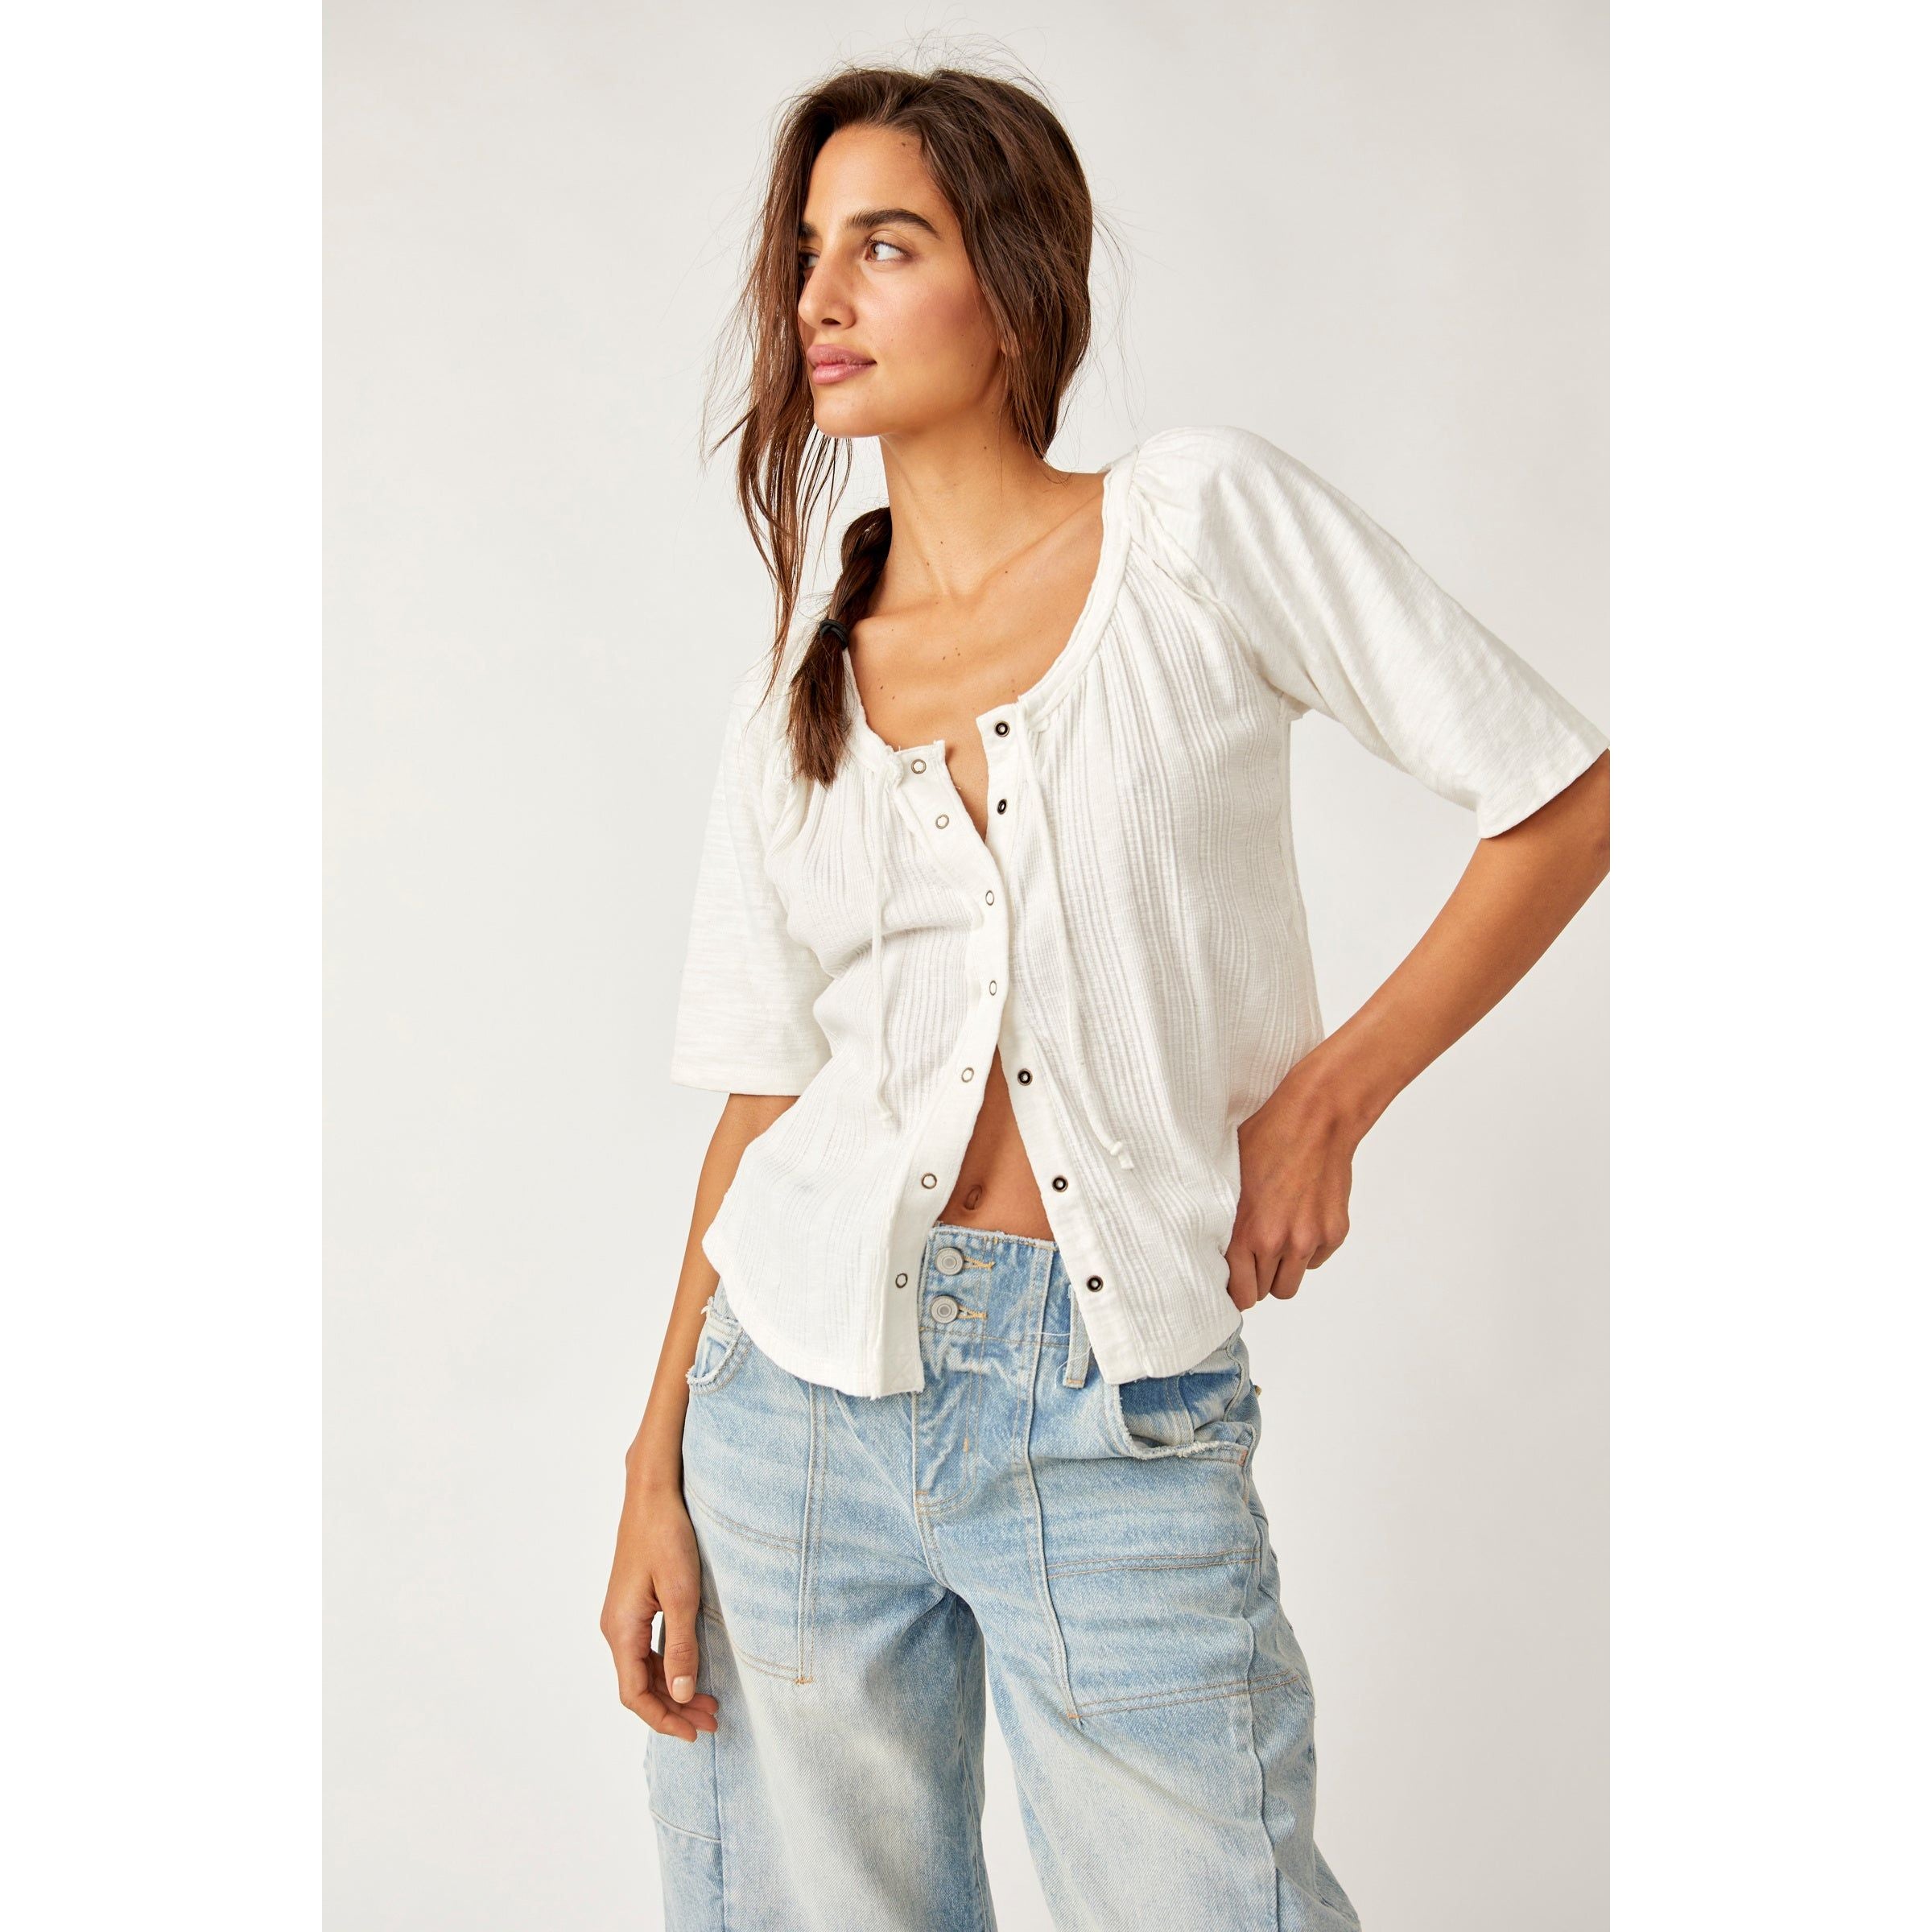 Free People - Daisy Tee in Optic White